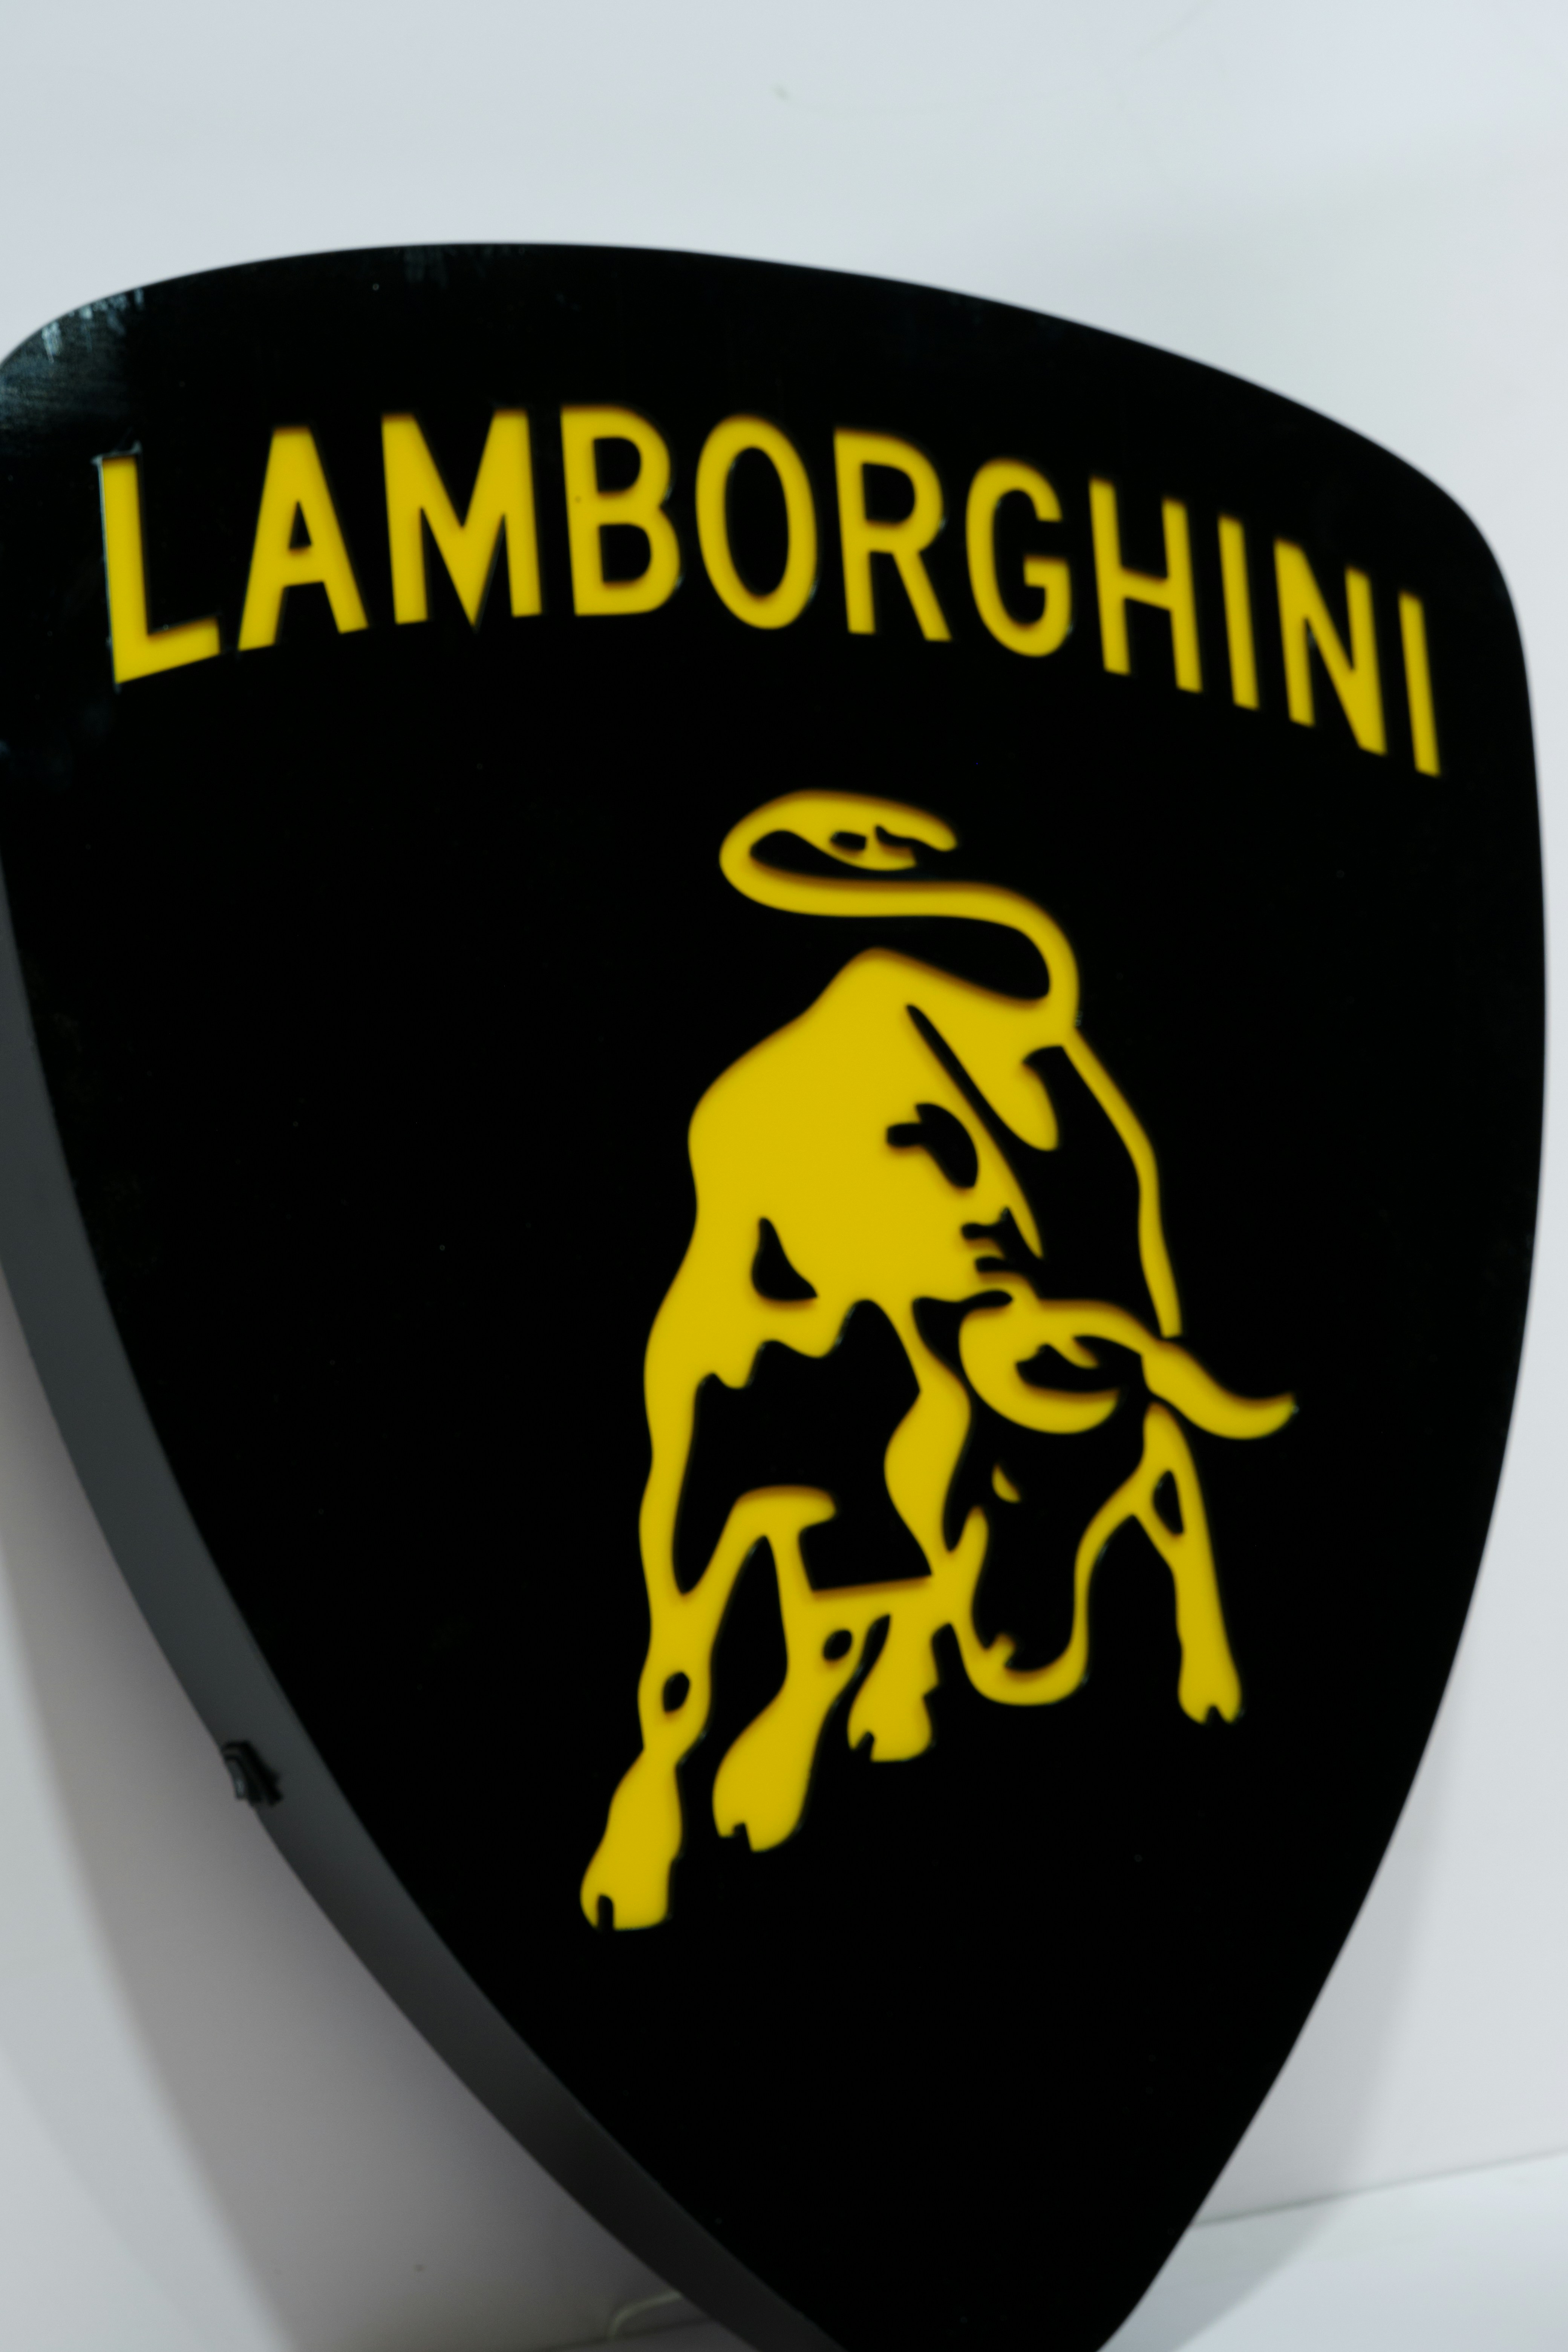 LAMBORGHINI ILLUMINATED SIGN for sale by auction in Istanbul, Turkey